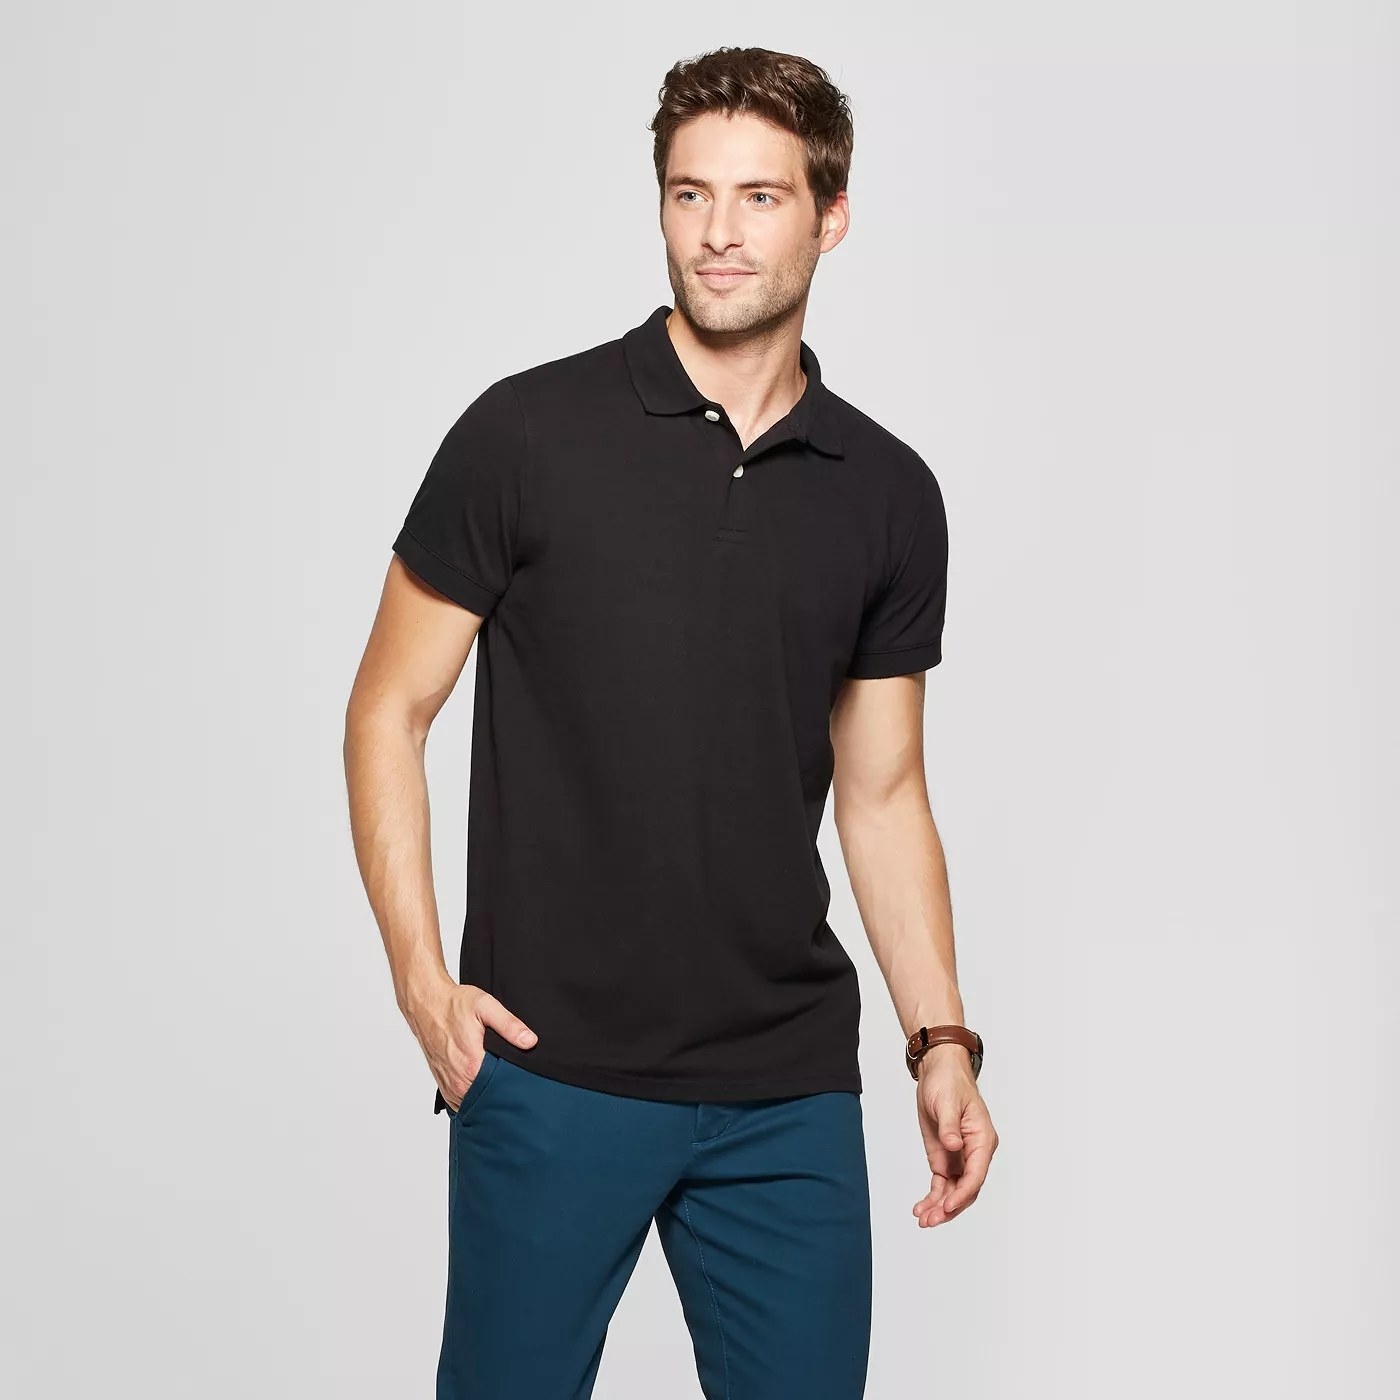 A model wearing the short sleeve shirt in black